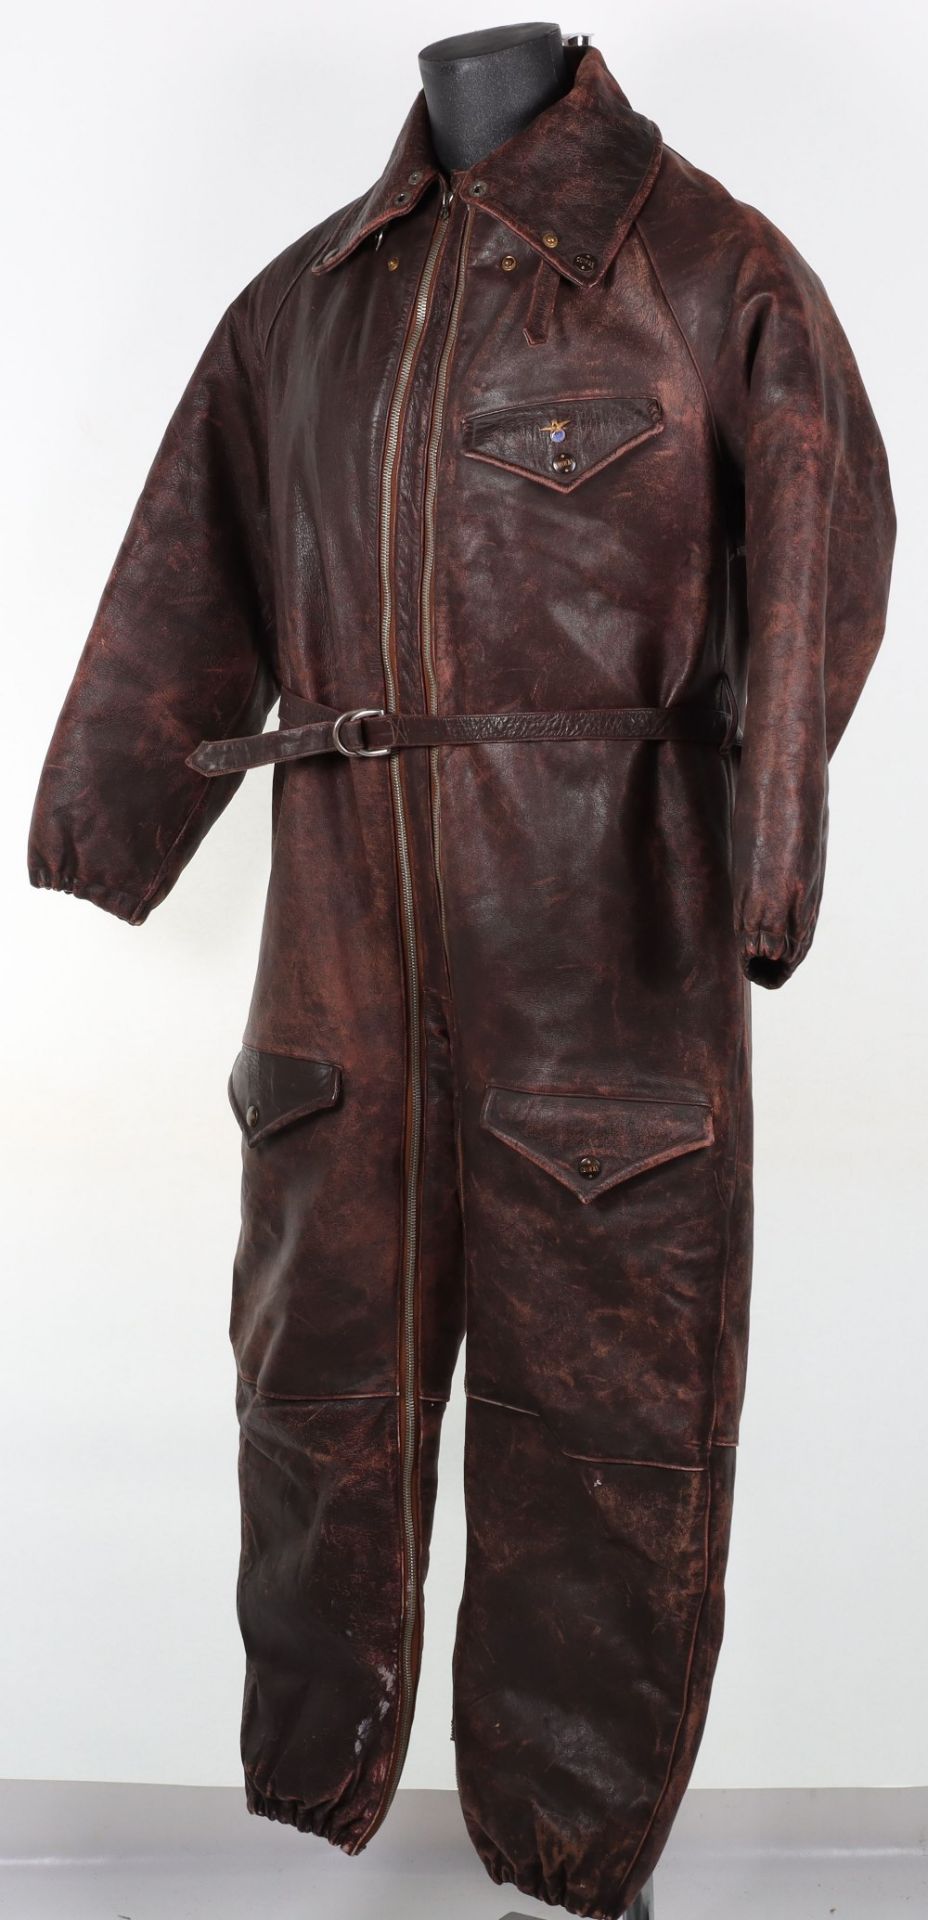 One Piece Leather Flight Suit - Image 6 of 8